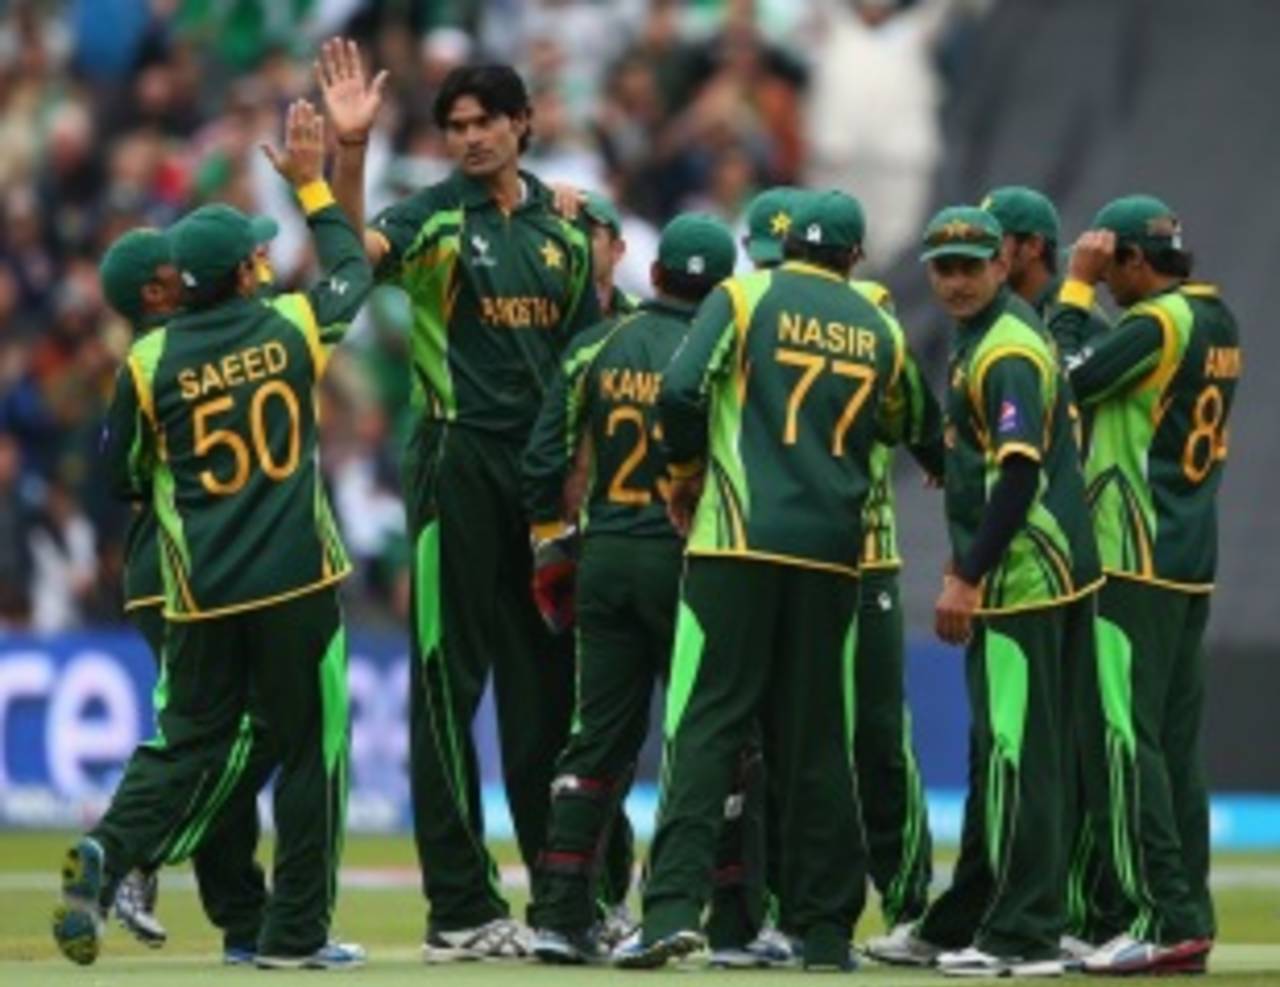 Mohammad Irfan celebrates a wicket with team-mates, Pakistan v South Africa, Champions Trophy, Group B, Edgbaston, June 10, 2013